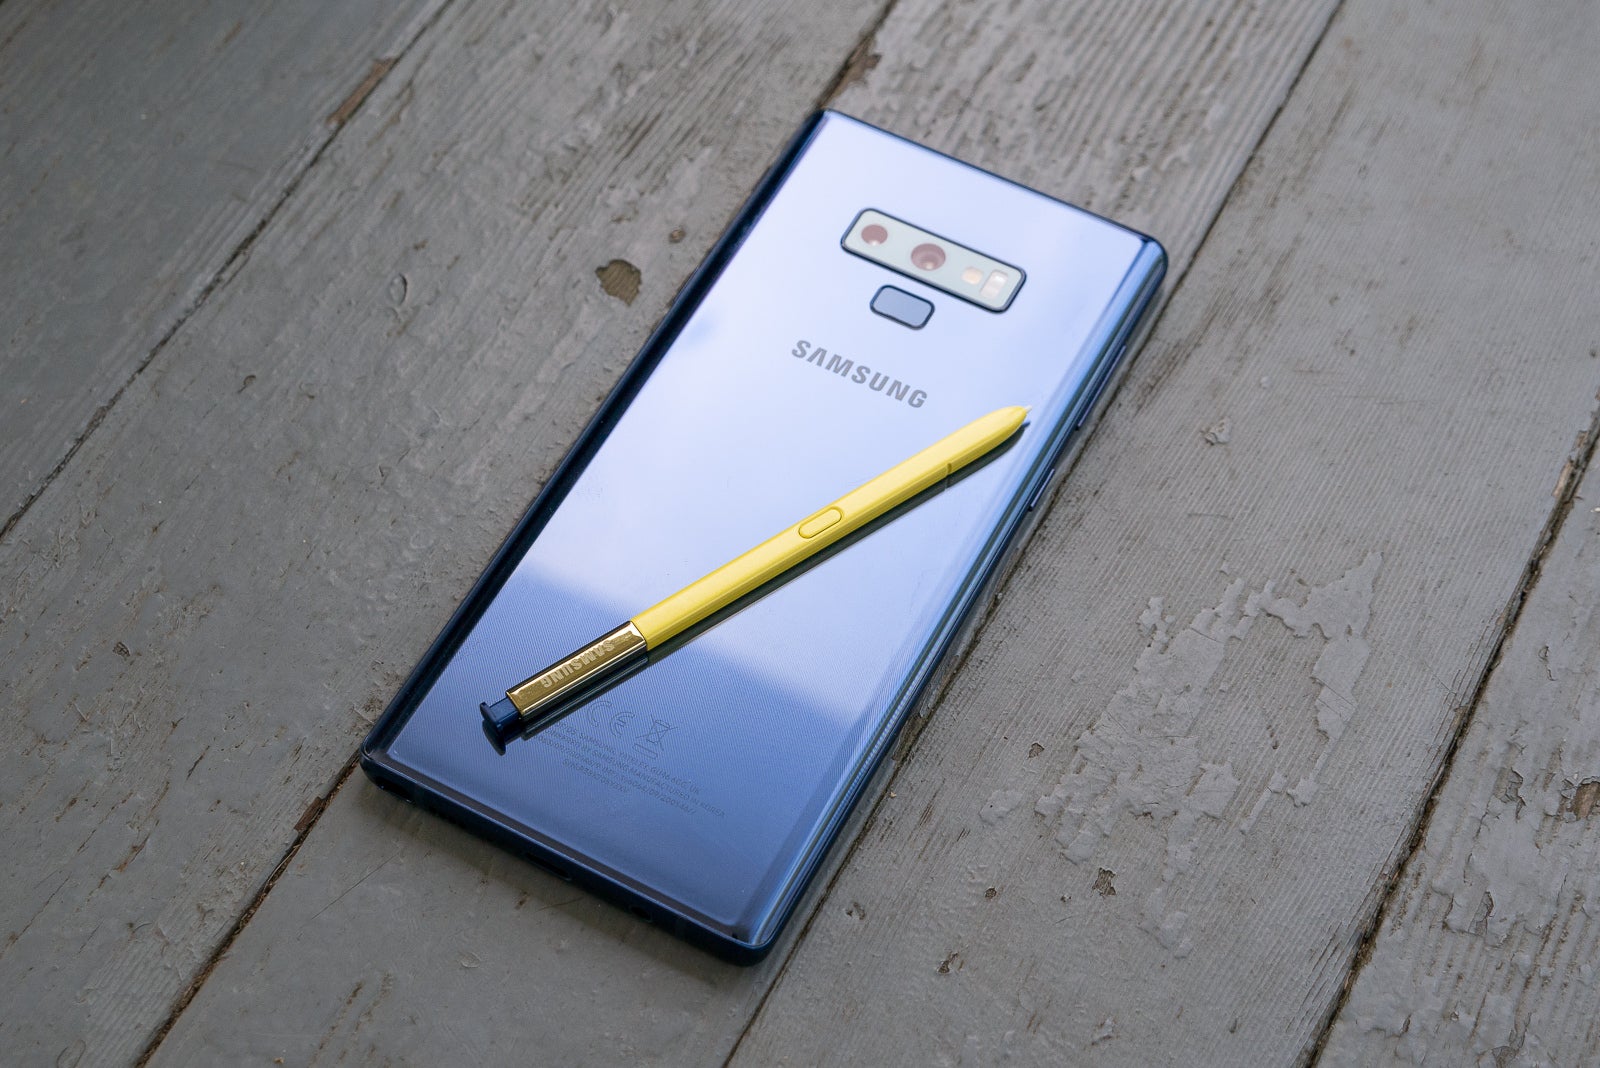 The Galaxy Note 10+ should have a bigger battery than the Galaxy Note 9 - The Galaxy Note 10+ will support 45W charging but its charger might not